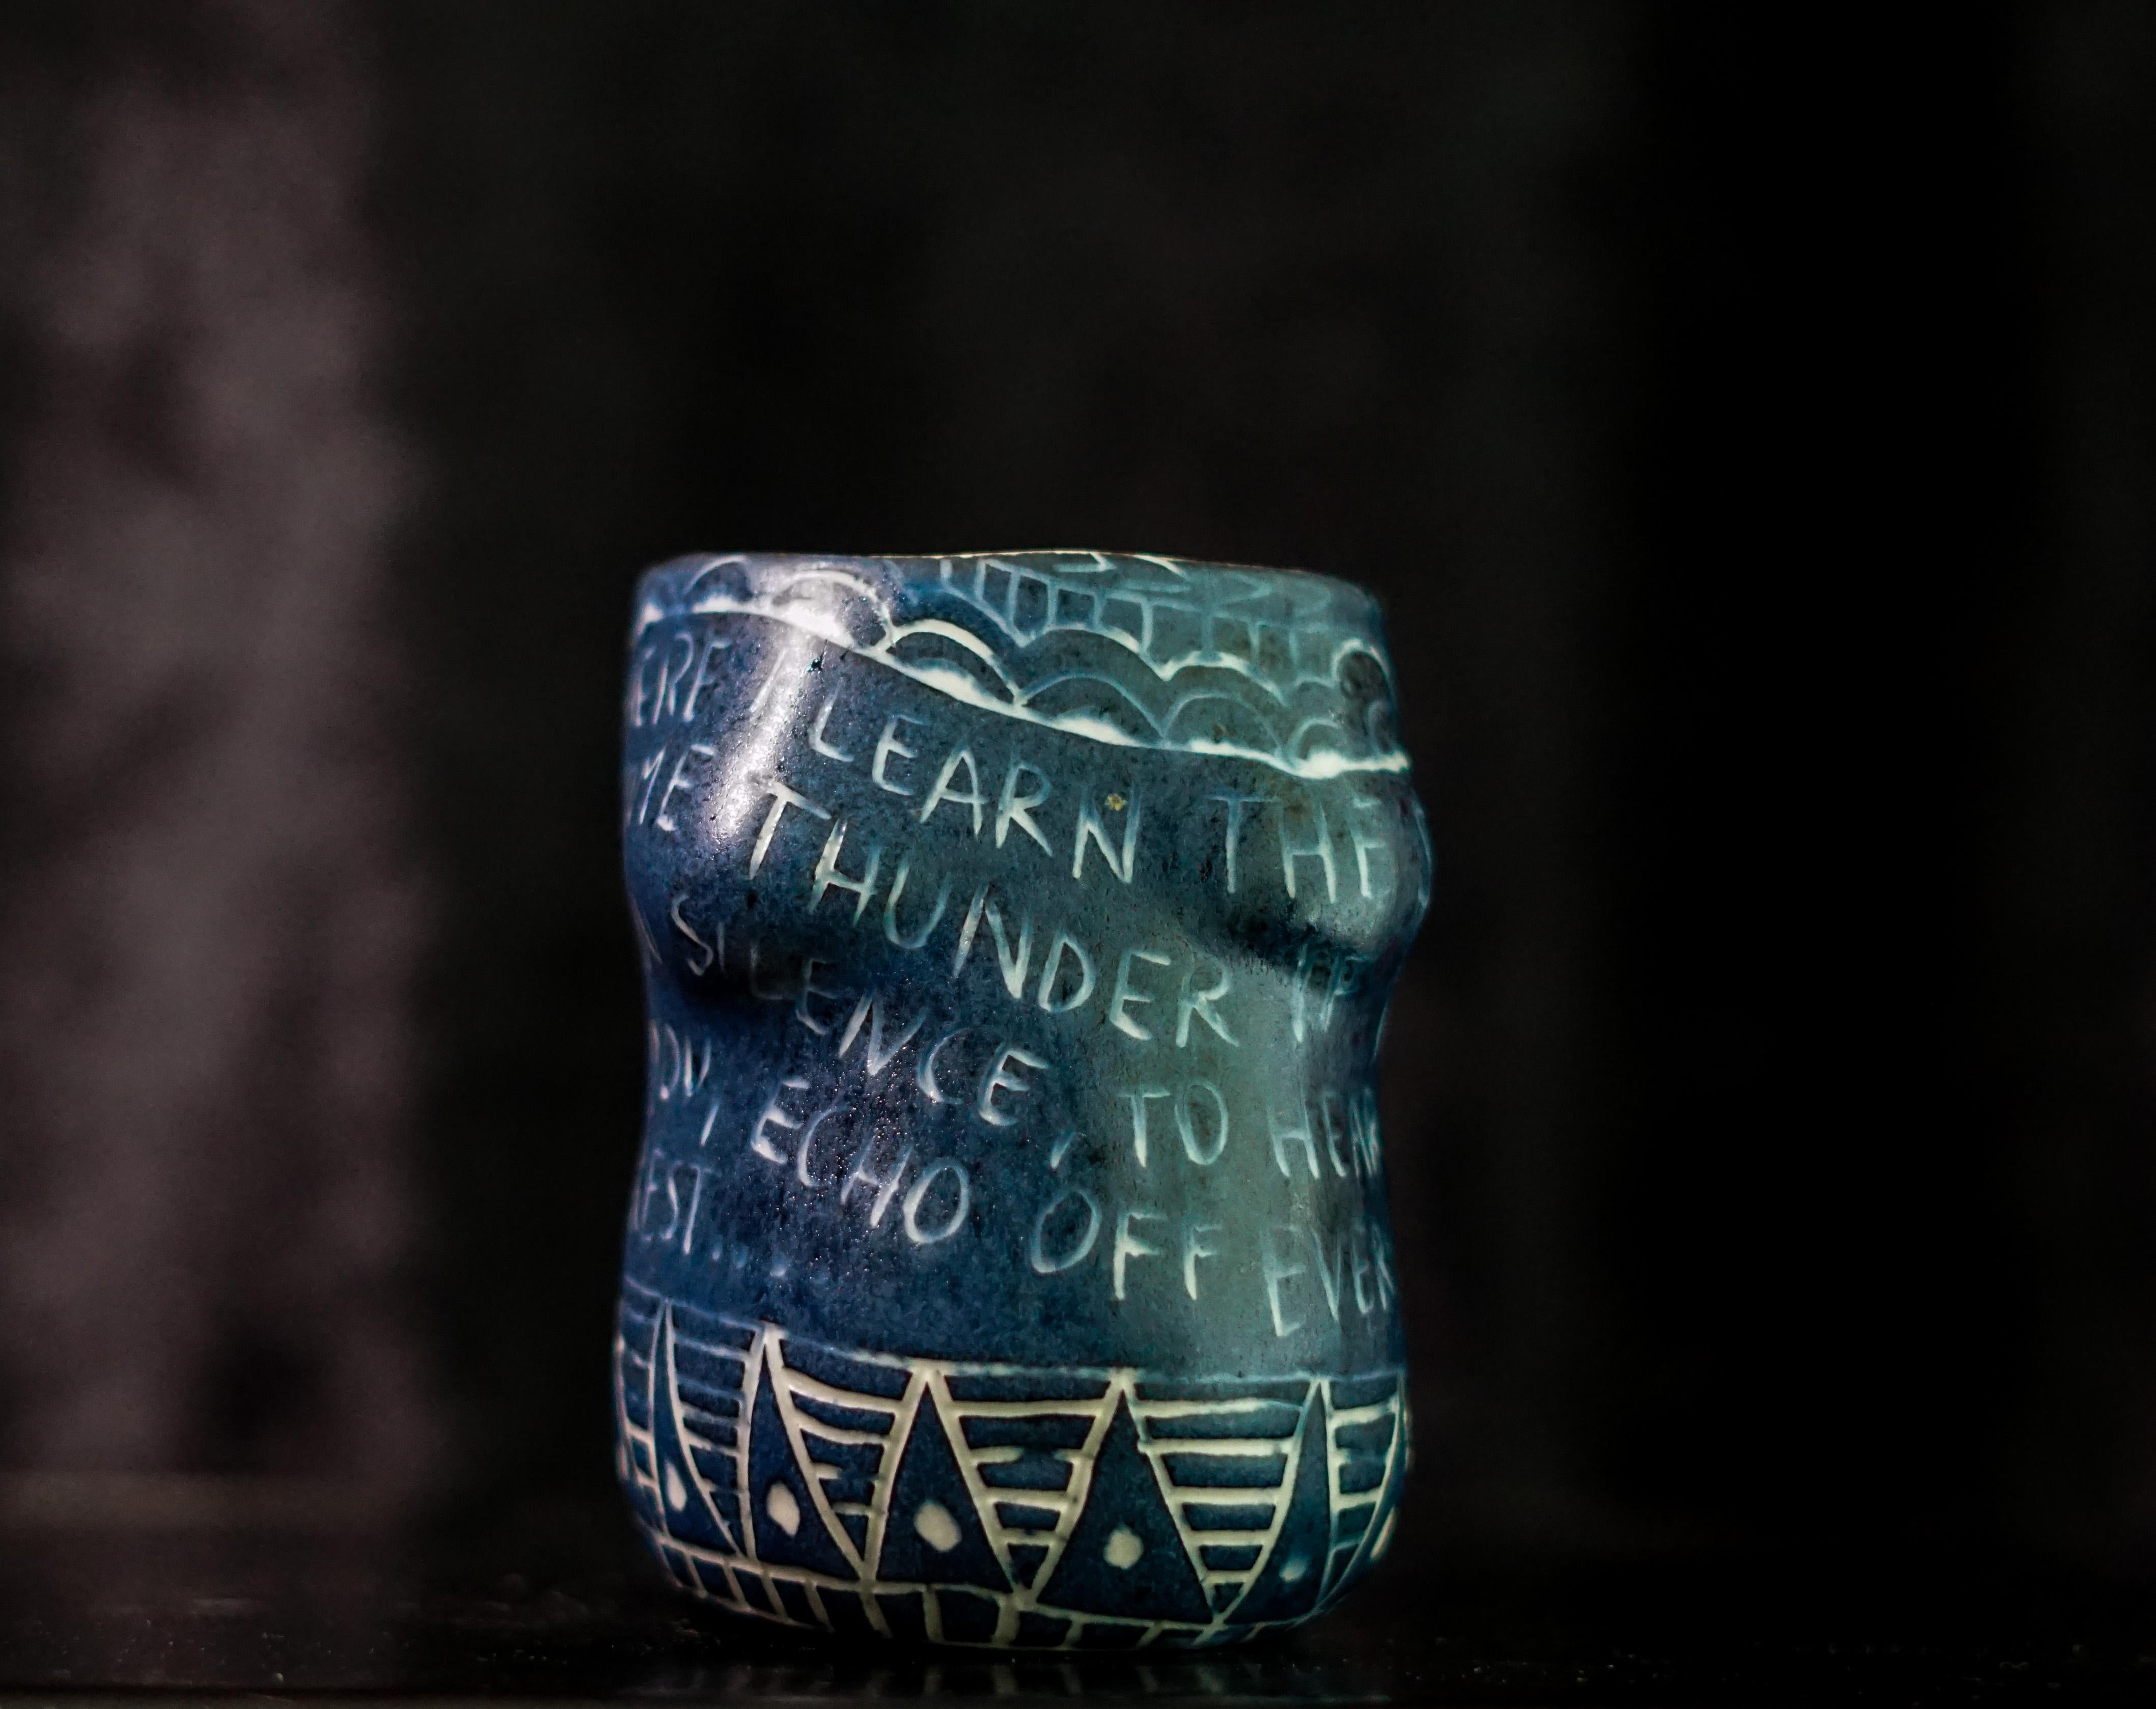 “Here I Learn..” Porcelain cup with sgraffito detailing by the artist - Sculpture by Alex Hodge